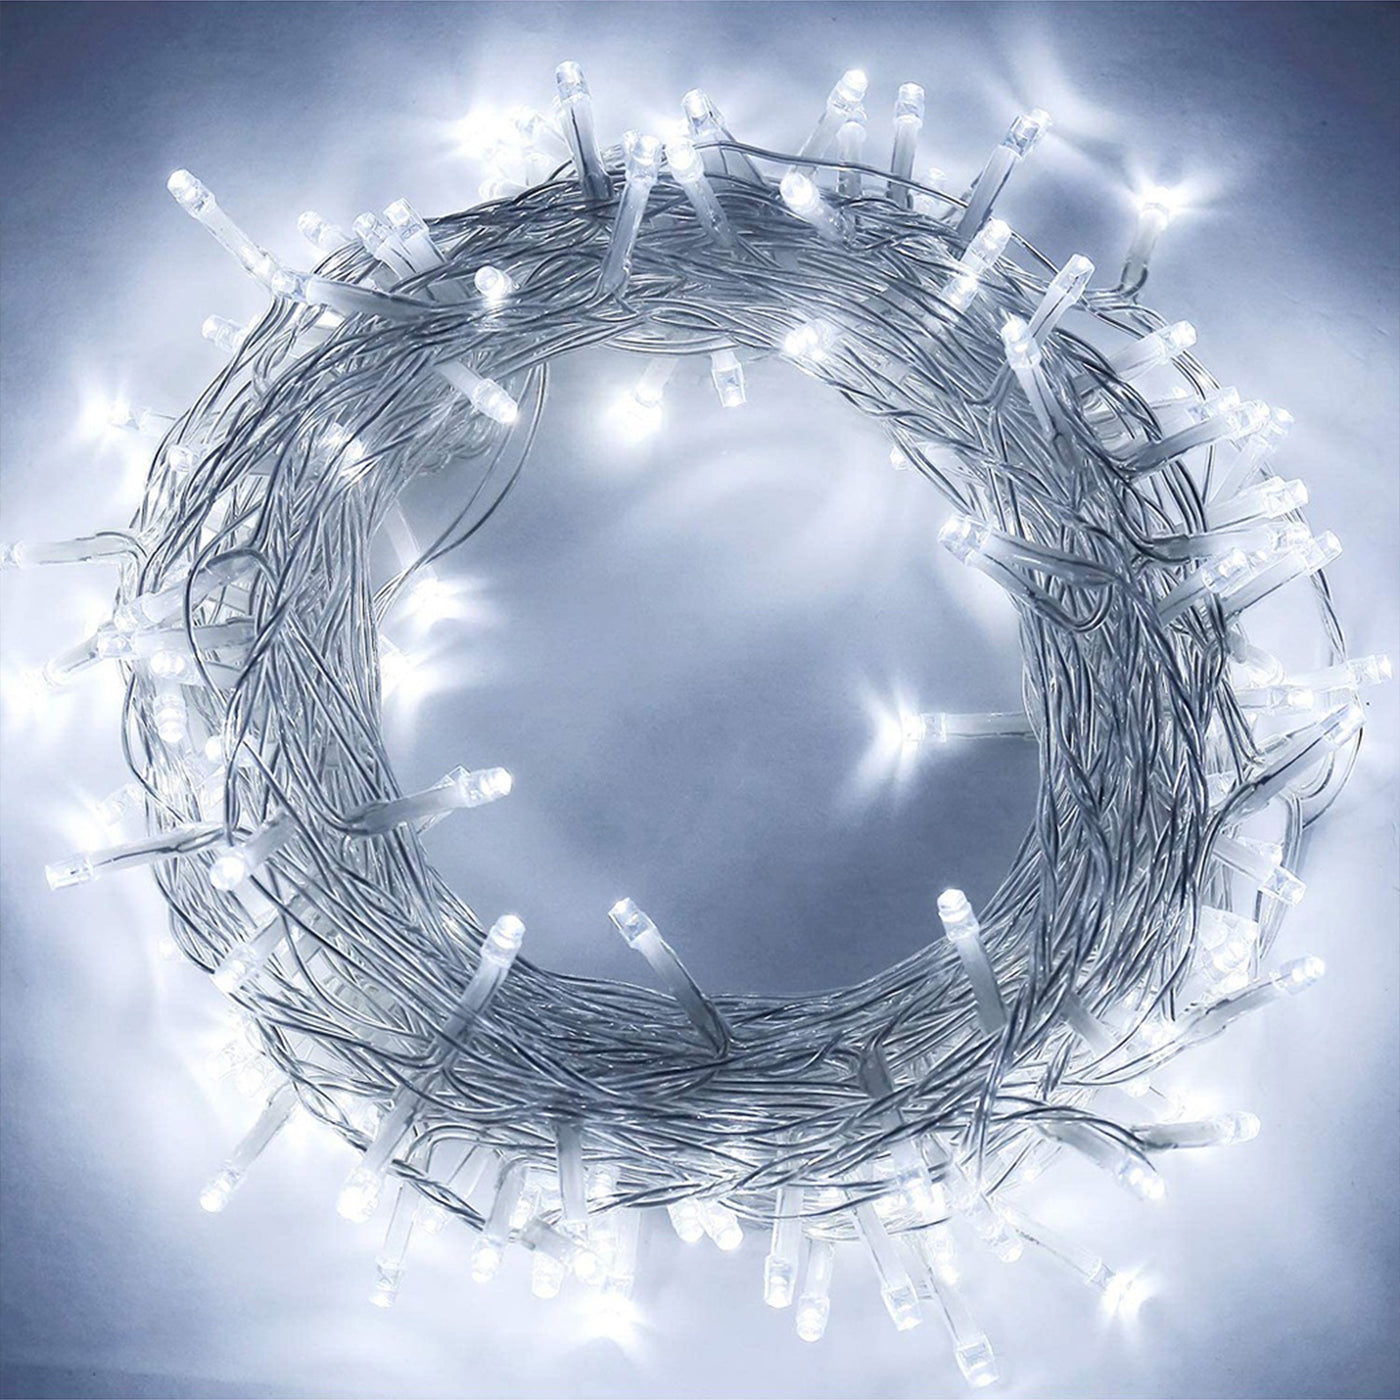 DecorTwist LED String Light for Home and Office Decor| Indoor & Outdoor Decorative Lights|Christmas |Diwali |Wedding | (White) | Christmas | Diwali | Wedding | (Blue) 12 Meter Length |(Pack of 2)